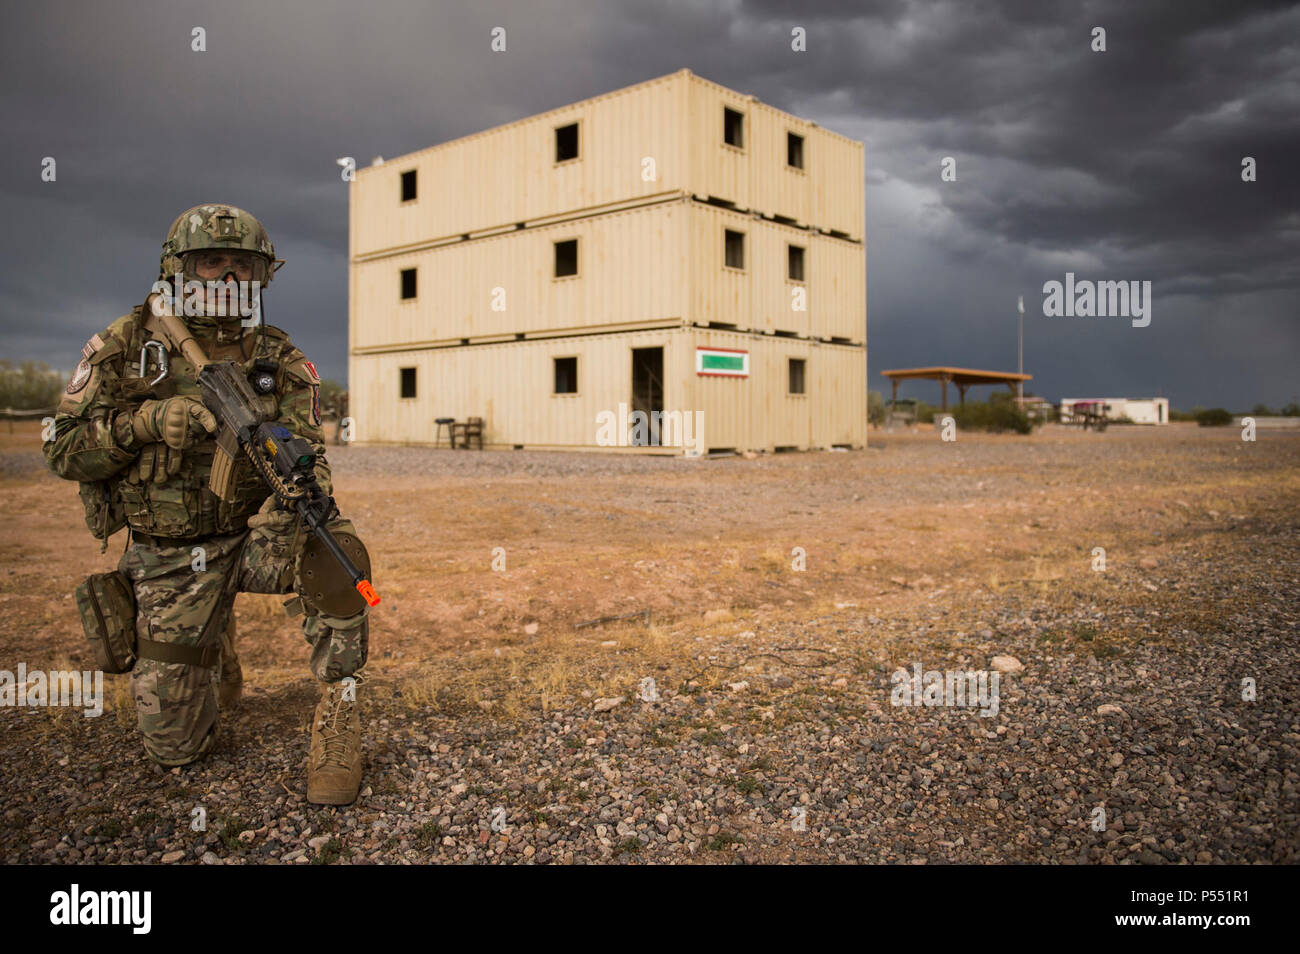 A Peruvian Air Force security forces Airman provides perimeter security during an isolated personnel scenario for exercise Angel Thunder 17 in Florence, Ariz., May 9, 2017. Angel Thunder is a two-week, Air Combat Command-sponsored, joint certified and accredited personnel recovery exercise focused on search and rescue. The exercise is designed to provide training for personnel recovery assets using a variety of scenarios to simulate deployment conditions and contingencies. Stock Photo